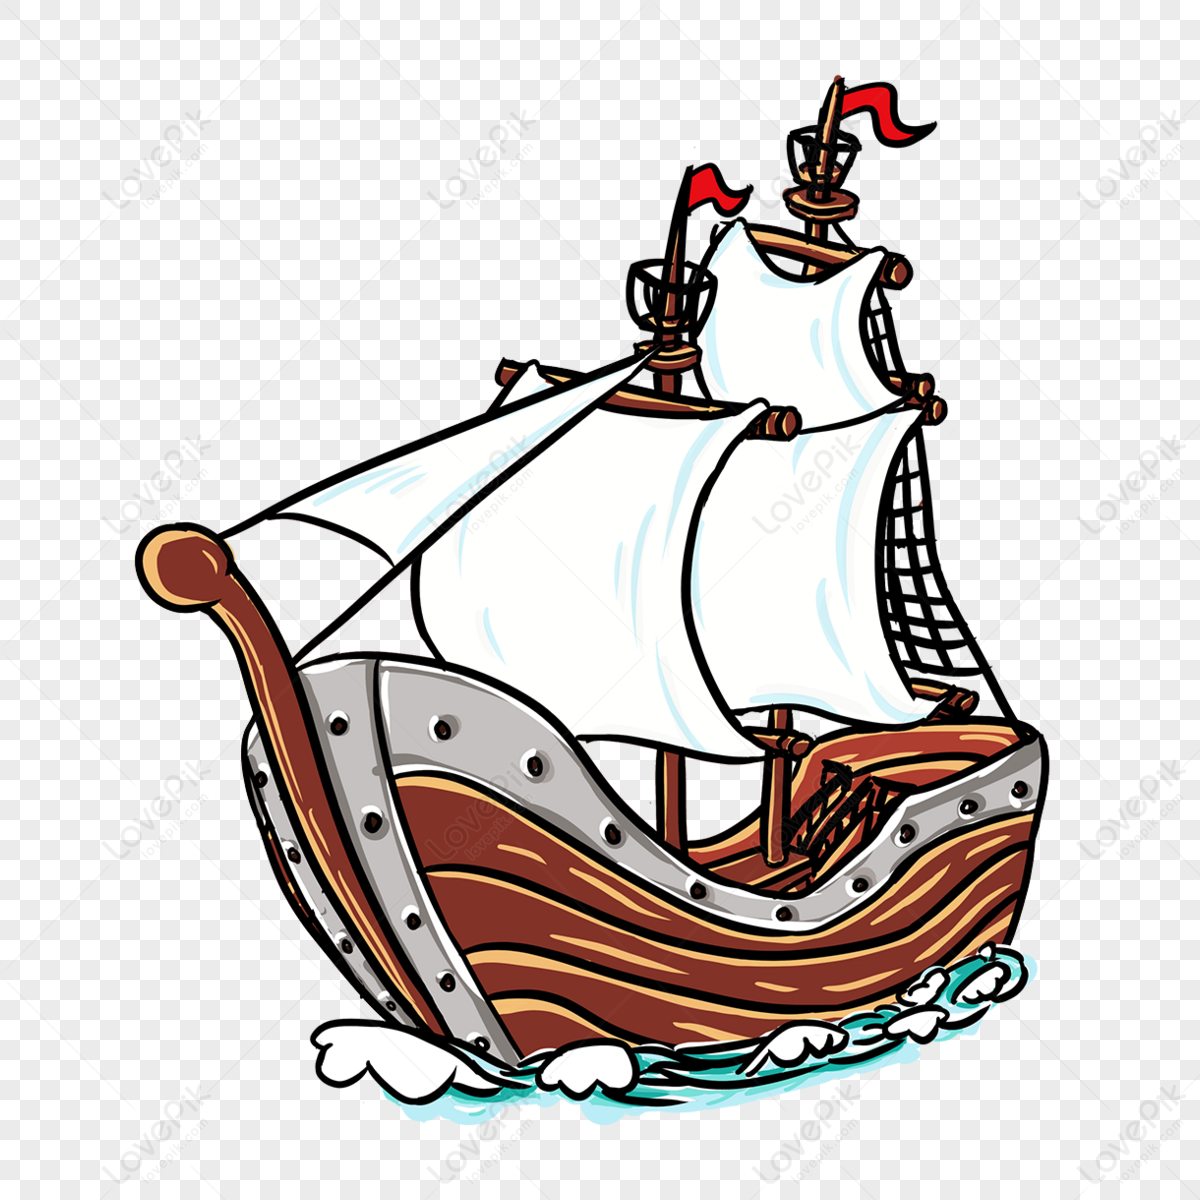 Cartoon style brown clipart sailing boat,ferry,spray png transparent background